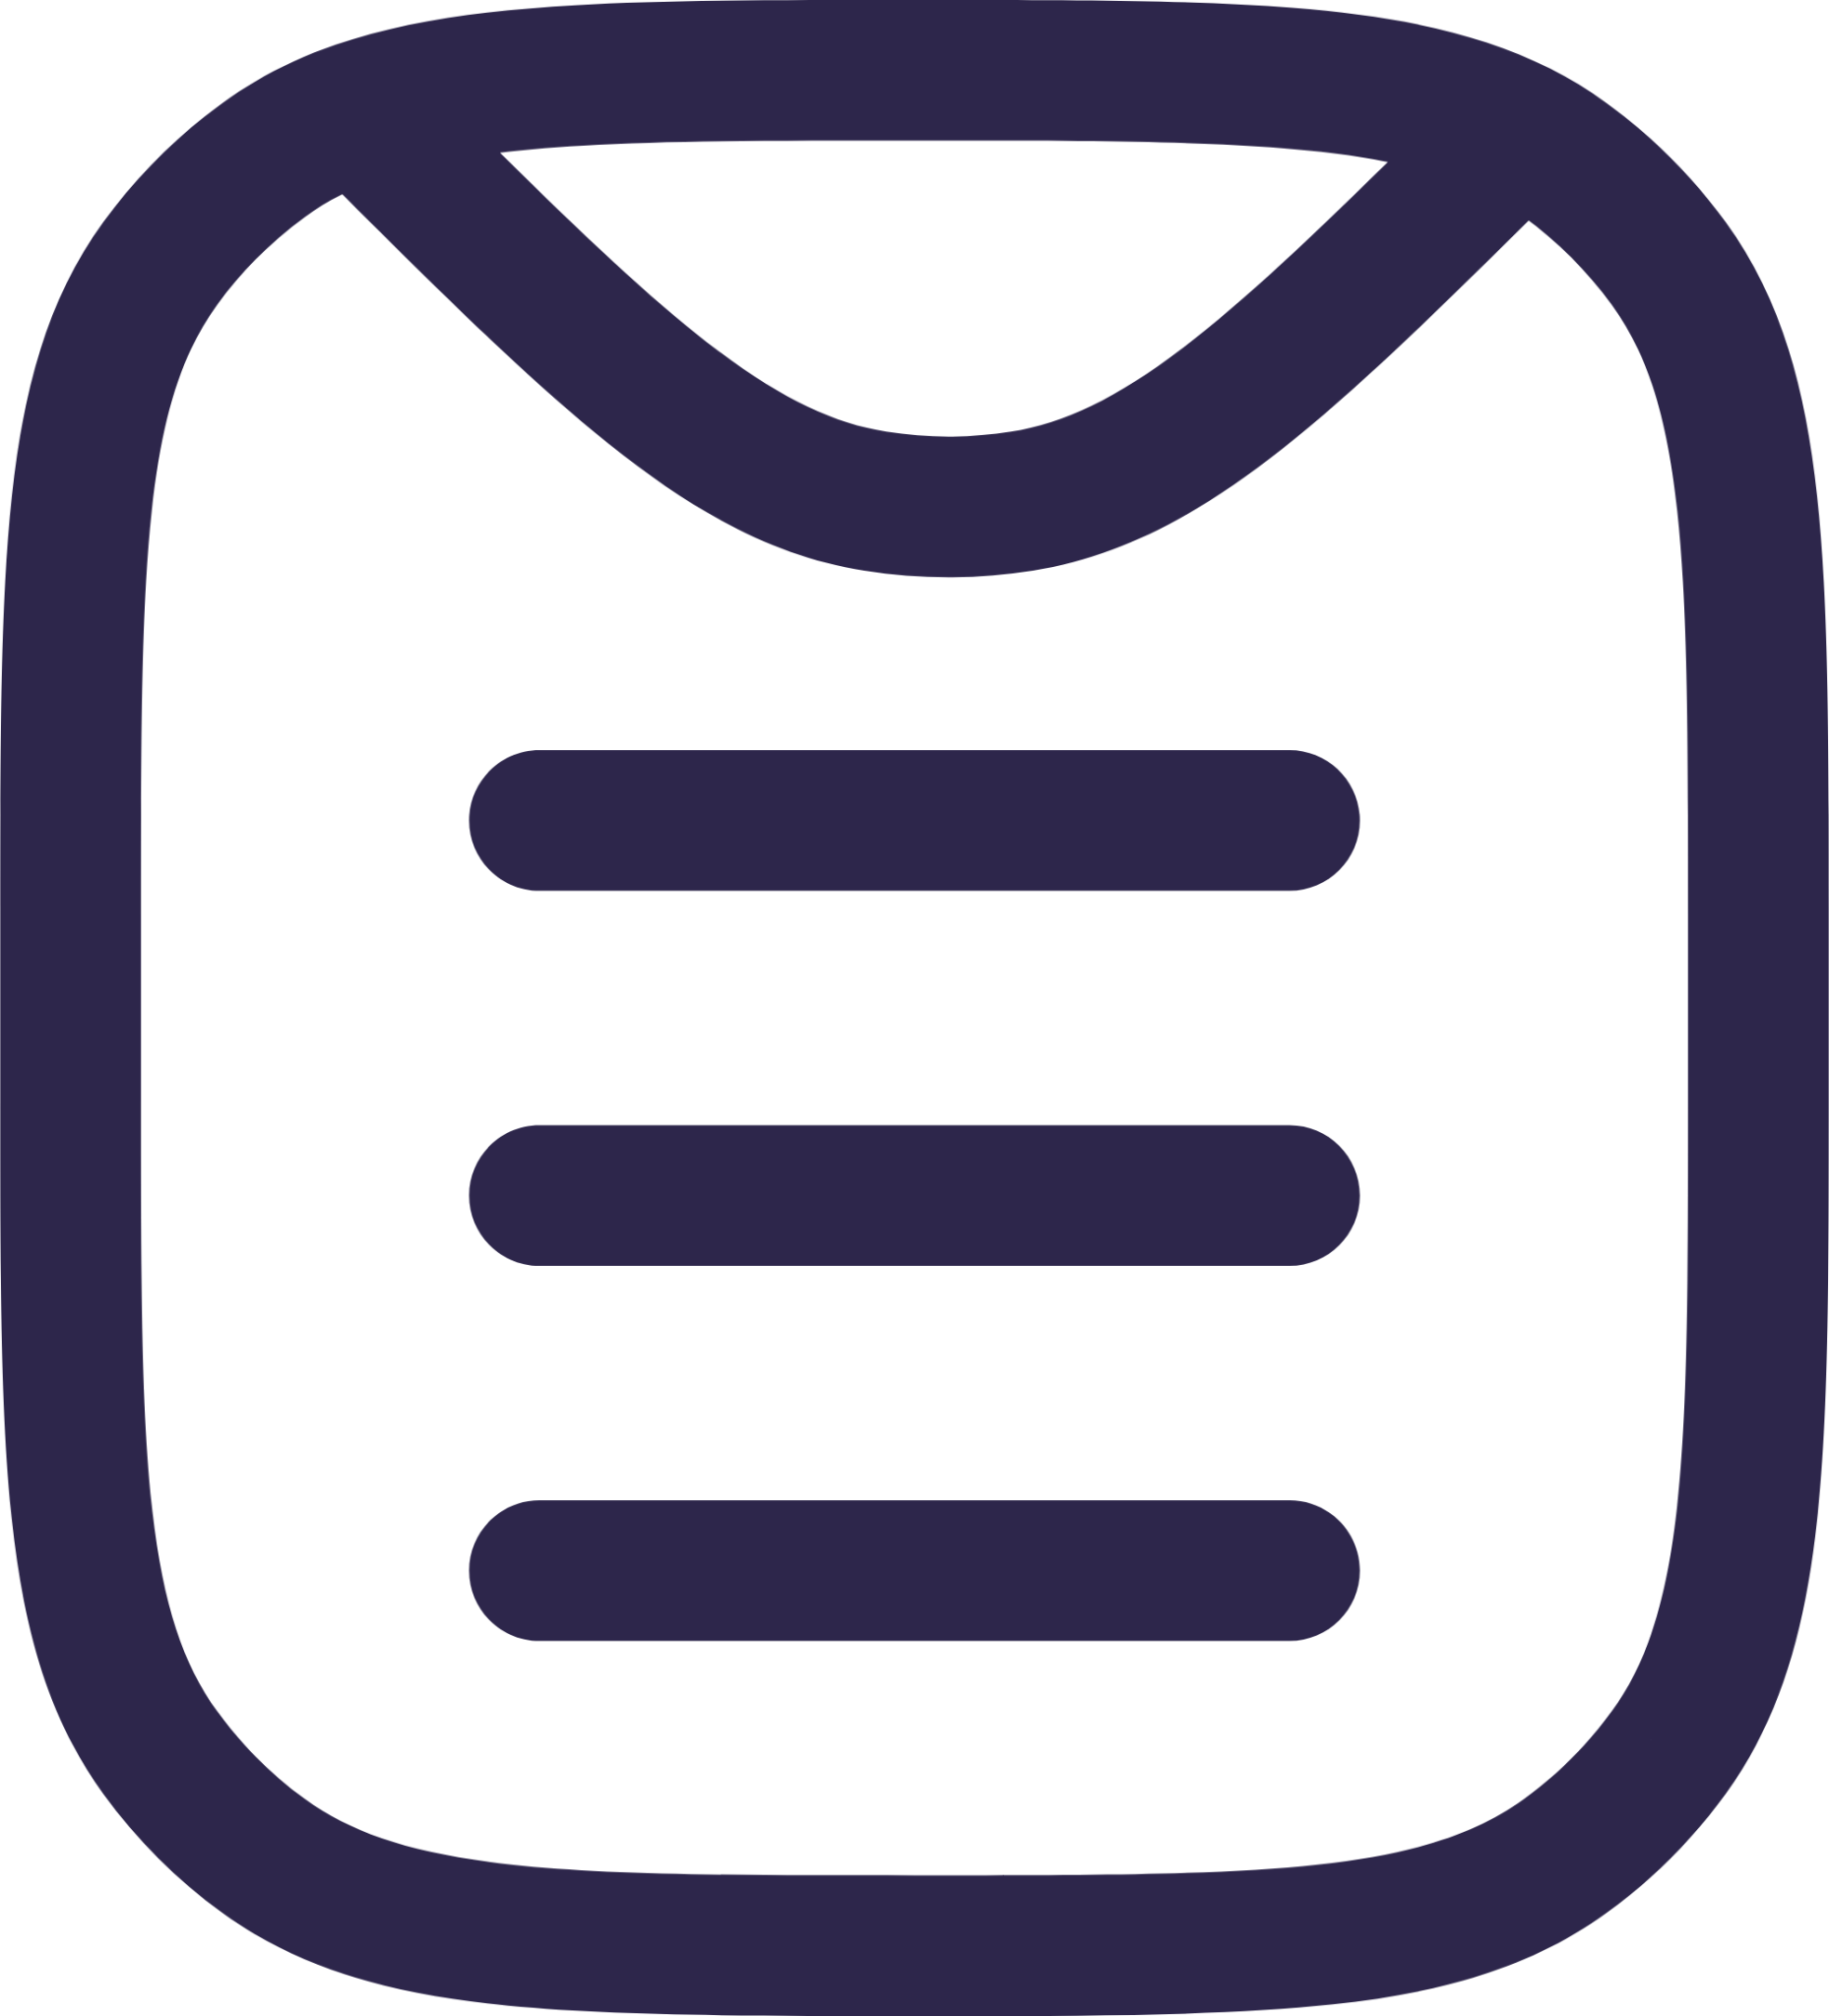 document justify center 1 icon